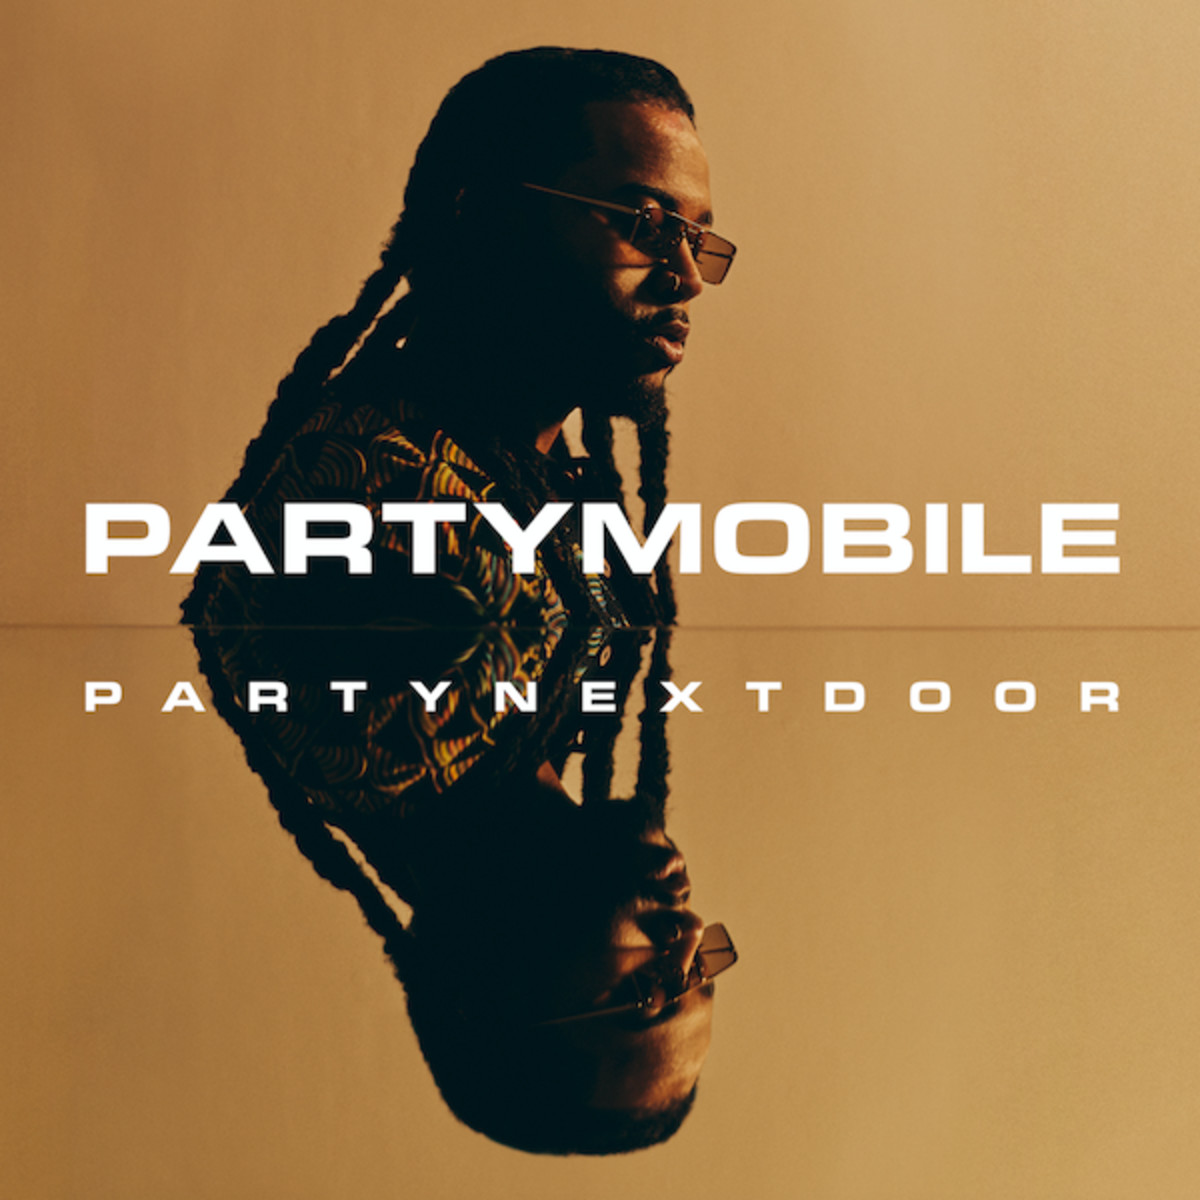 PARTYNEXTDOOR Shares Title and Cover Art for New Album ...
